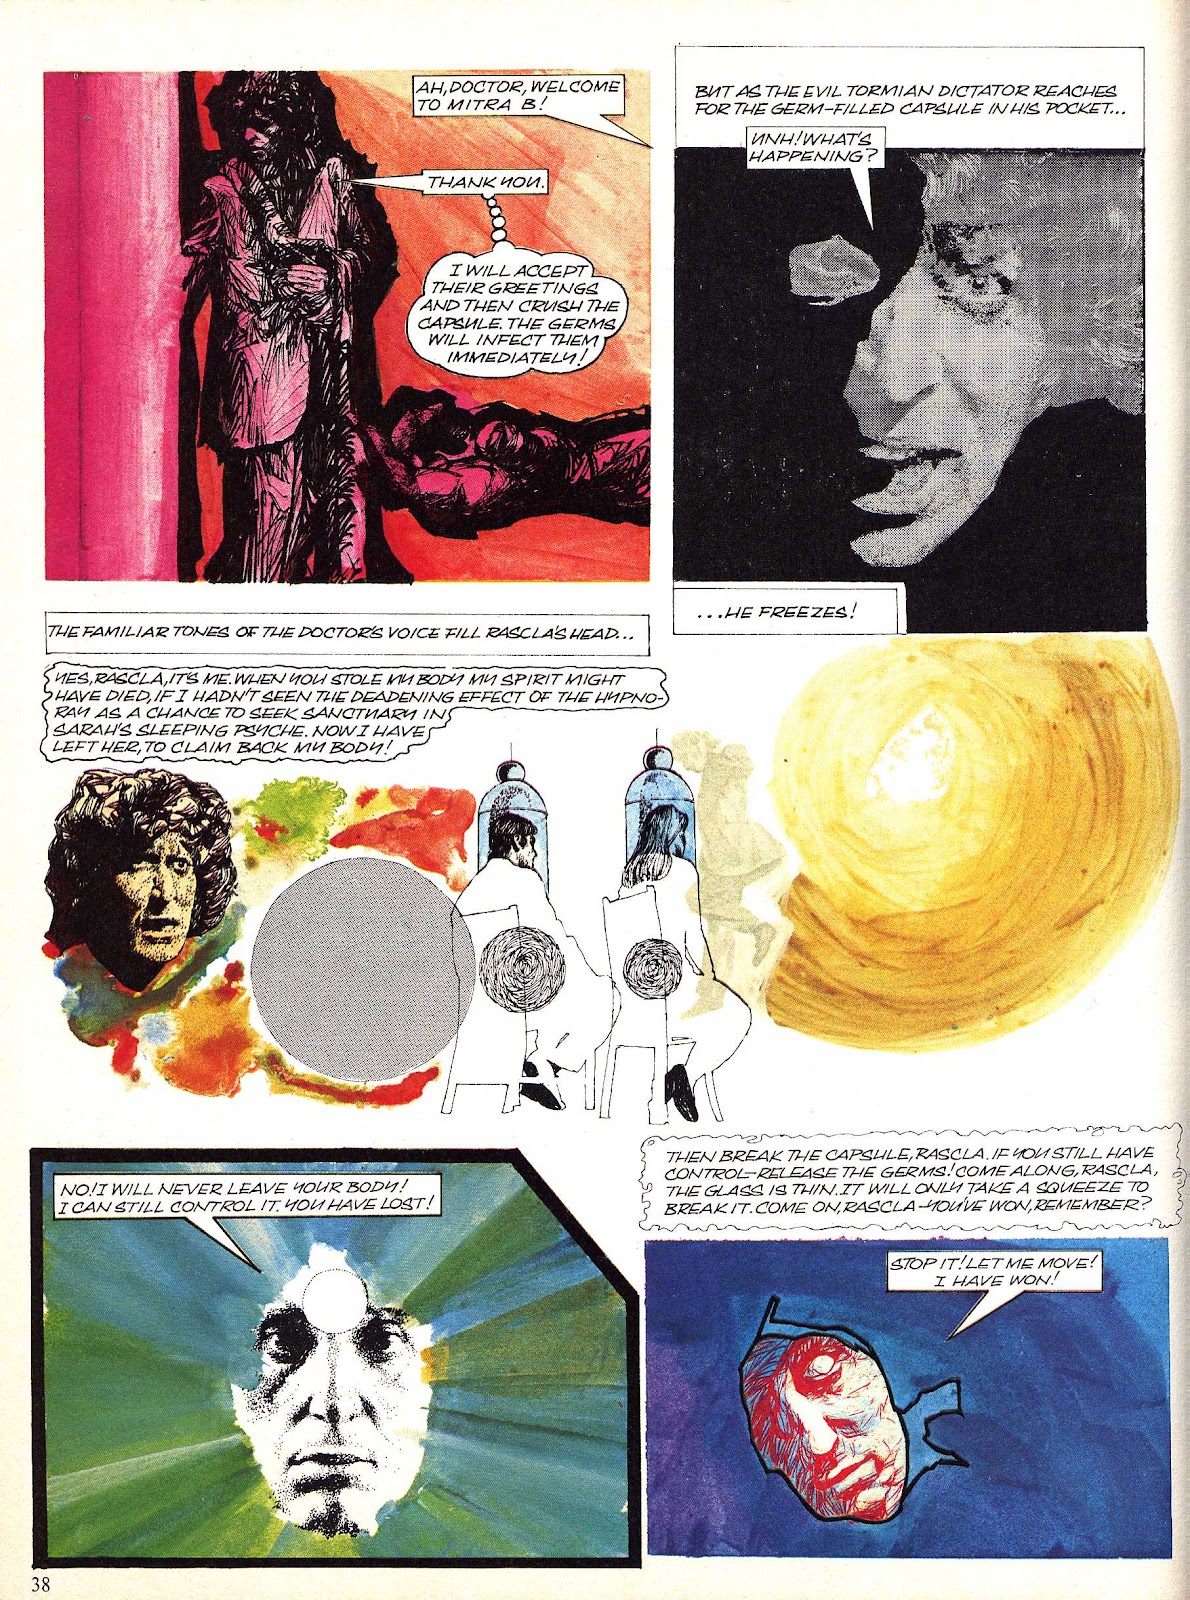 Doctor Who Annual issue 1977 - Page 6